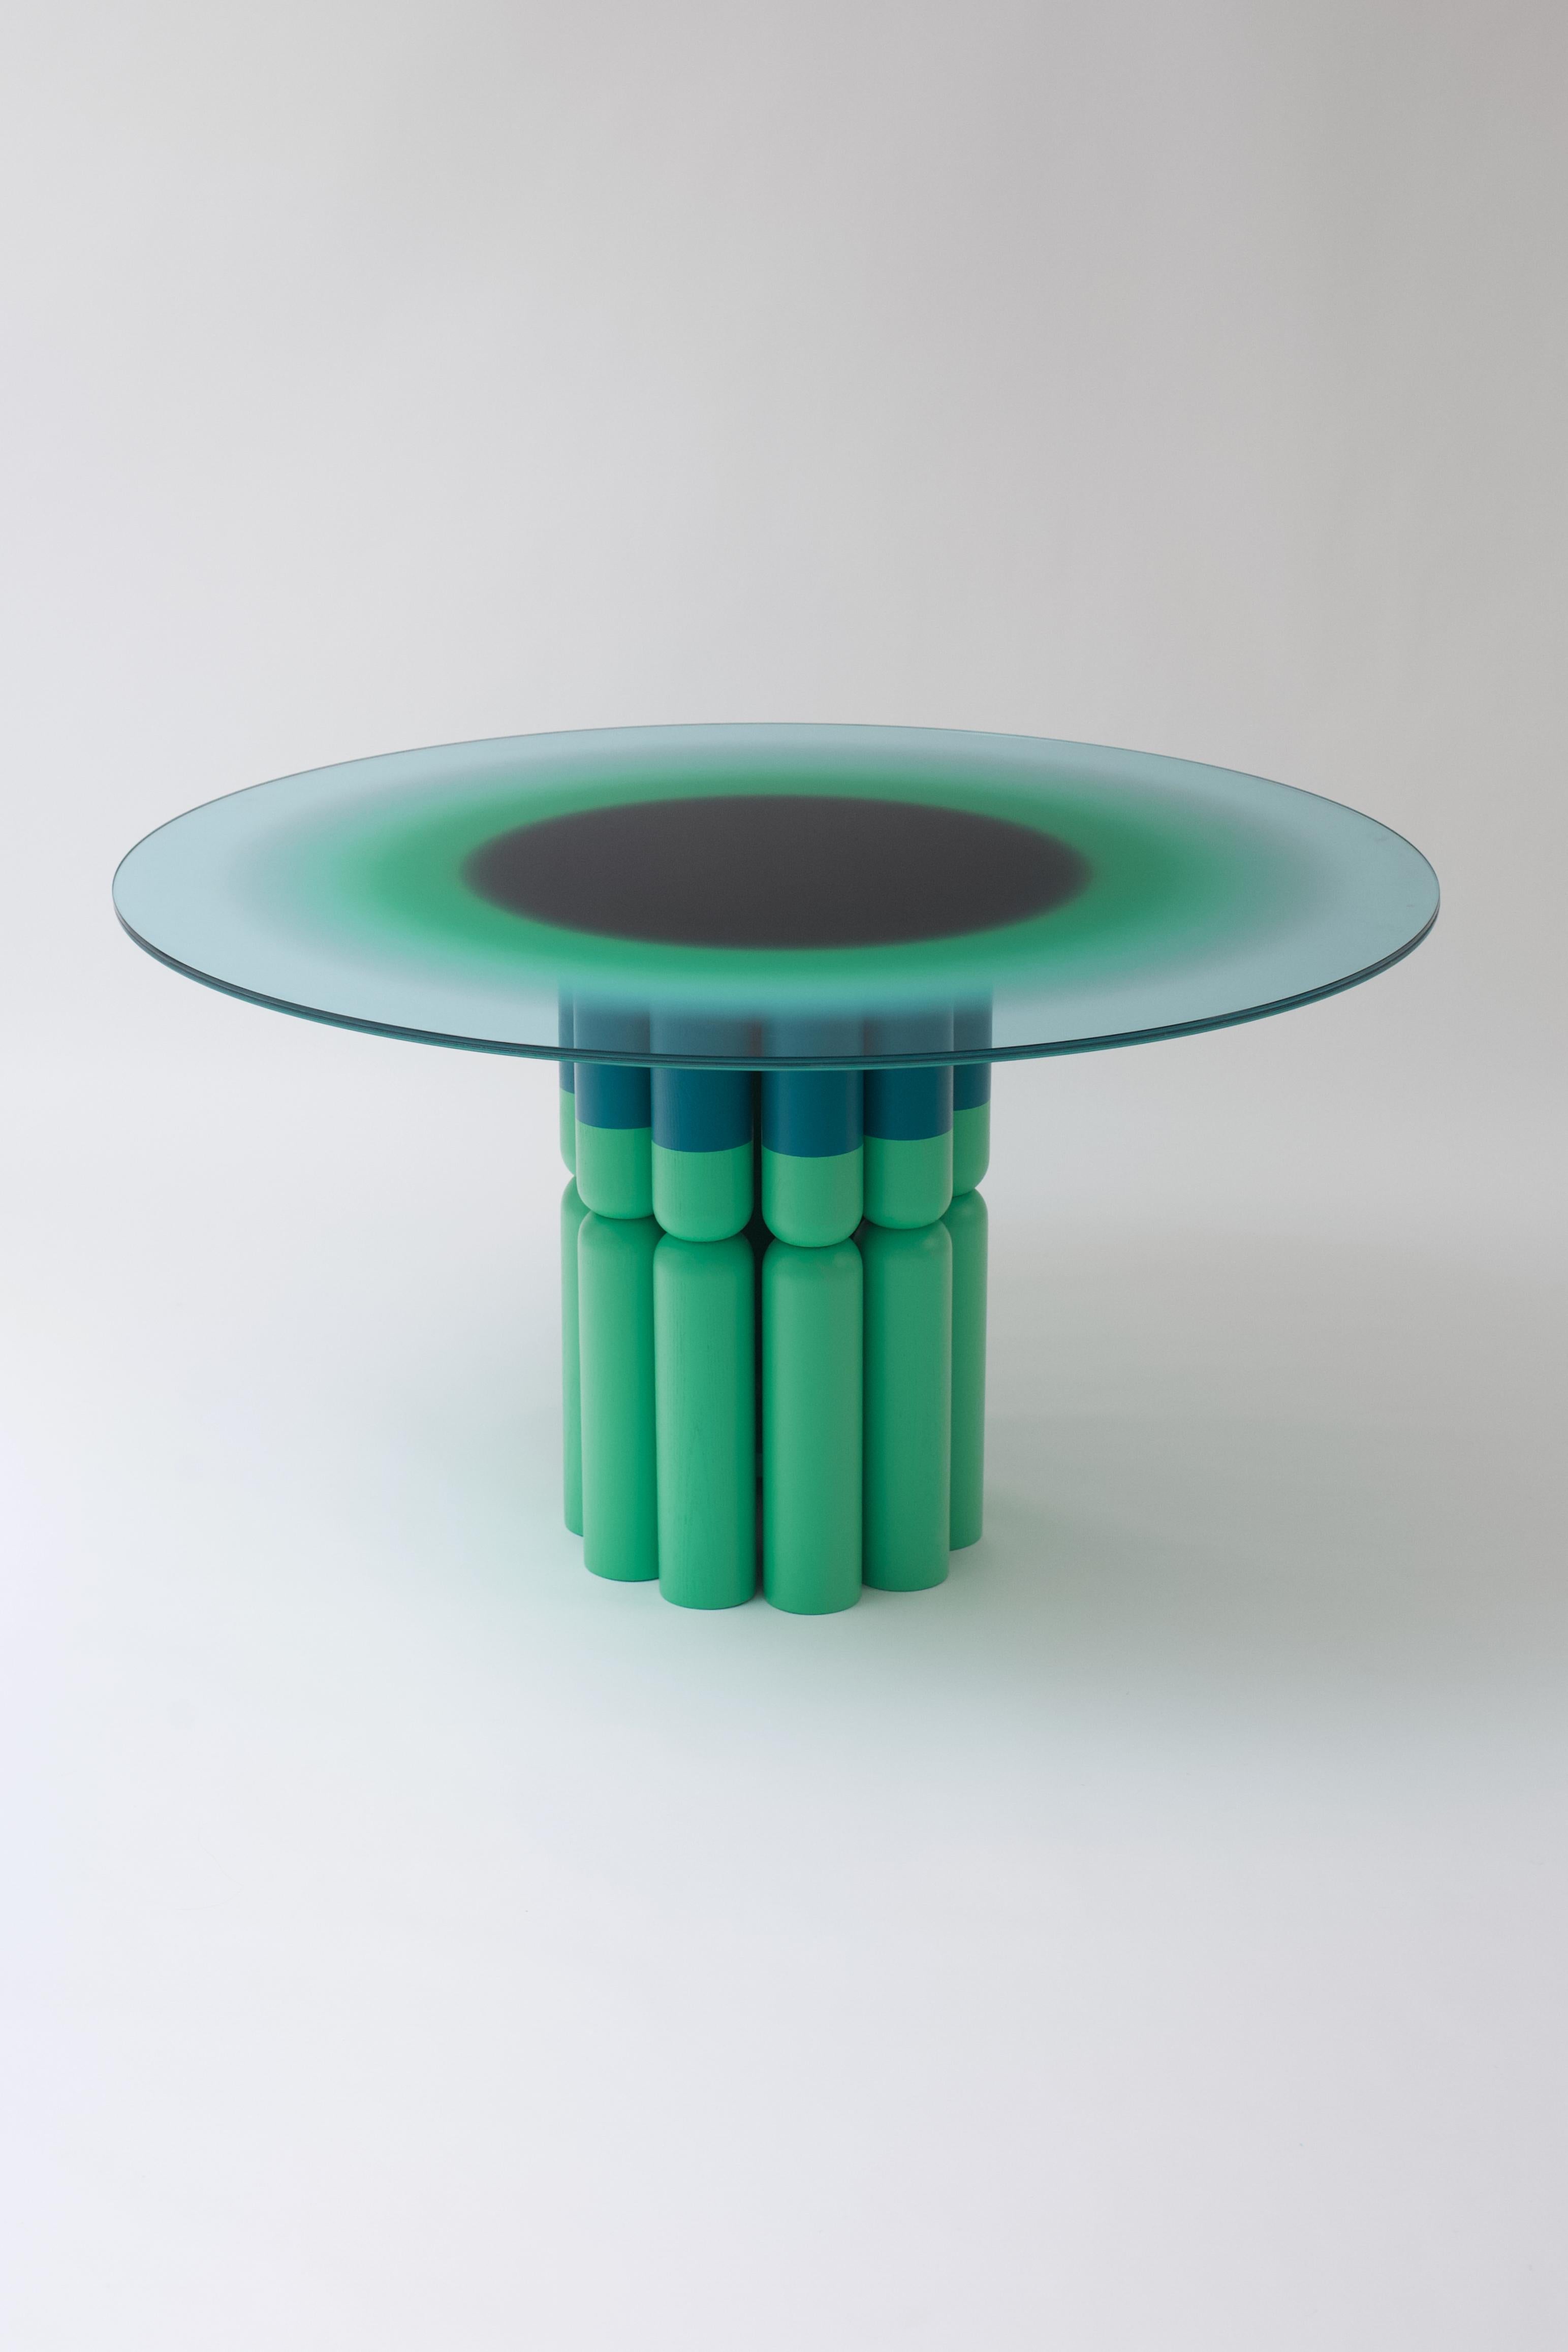 Happy meal, unique dining table by STUDIO YOLK
Dimensions: Ø 130 cm, 72 cm
Materials: Wood and glass top
Unique: One of one

Happy meal is about the energy that is found in and around ingesting a meal, about being in and out of focus and contact,